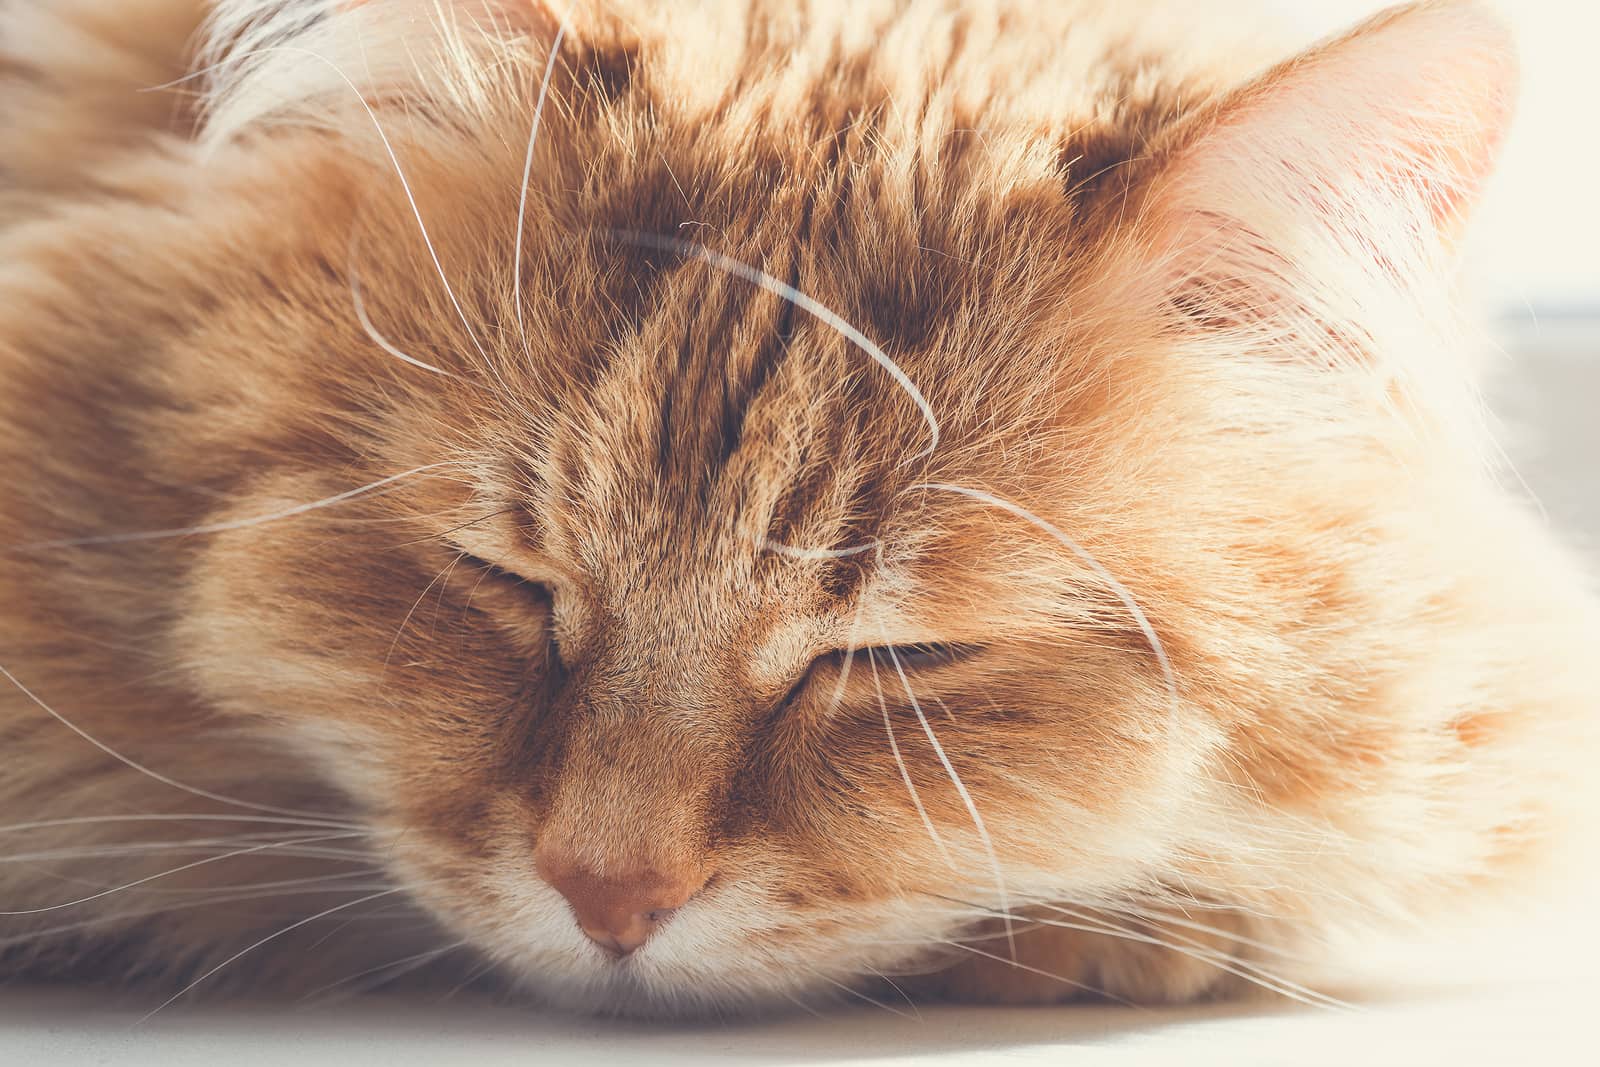 Dementia in a cat: signs, causes and help for a pet